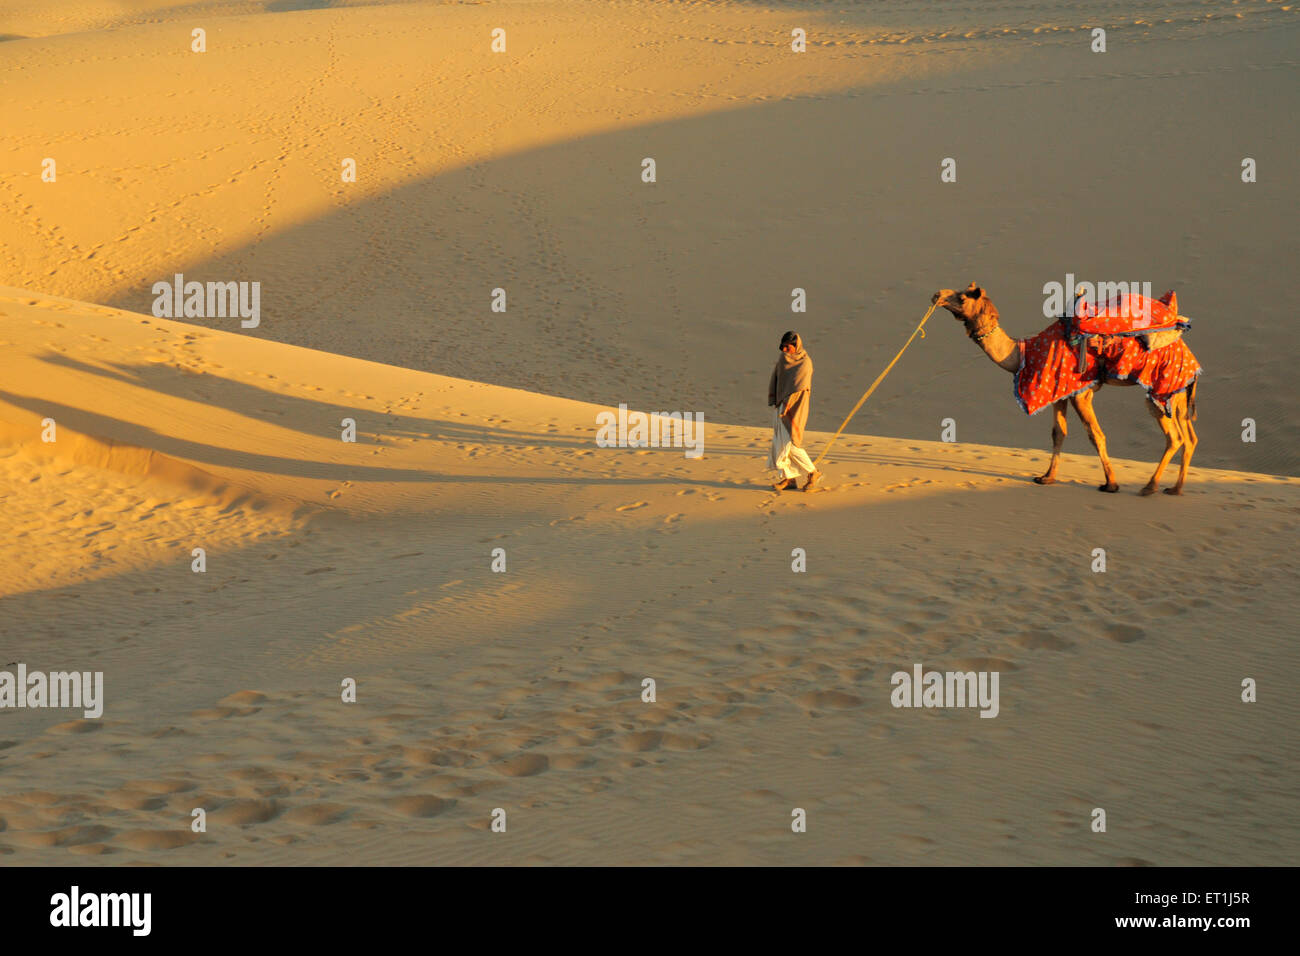 Camel with owner walking in soft sand dunes at Sam ; Jaisalmer ; Rajasthan ; India Stock Photo